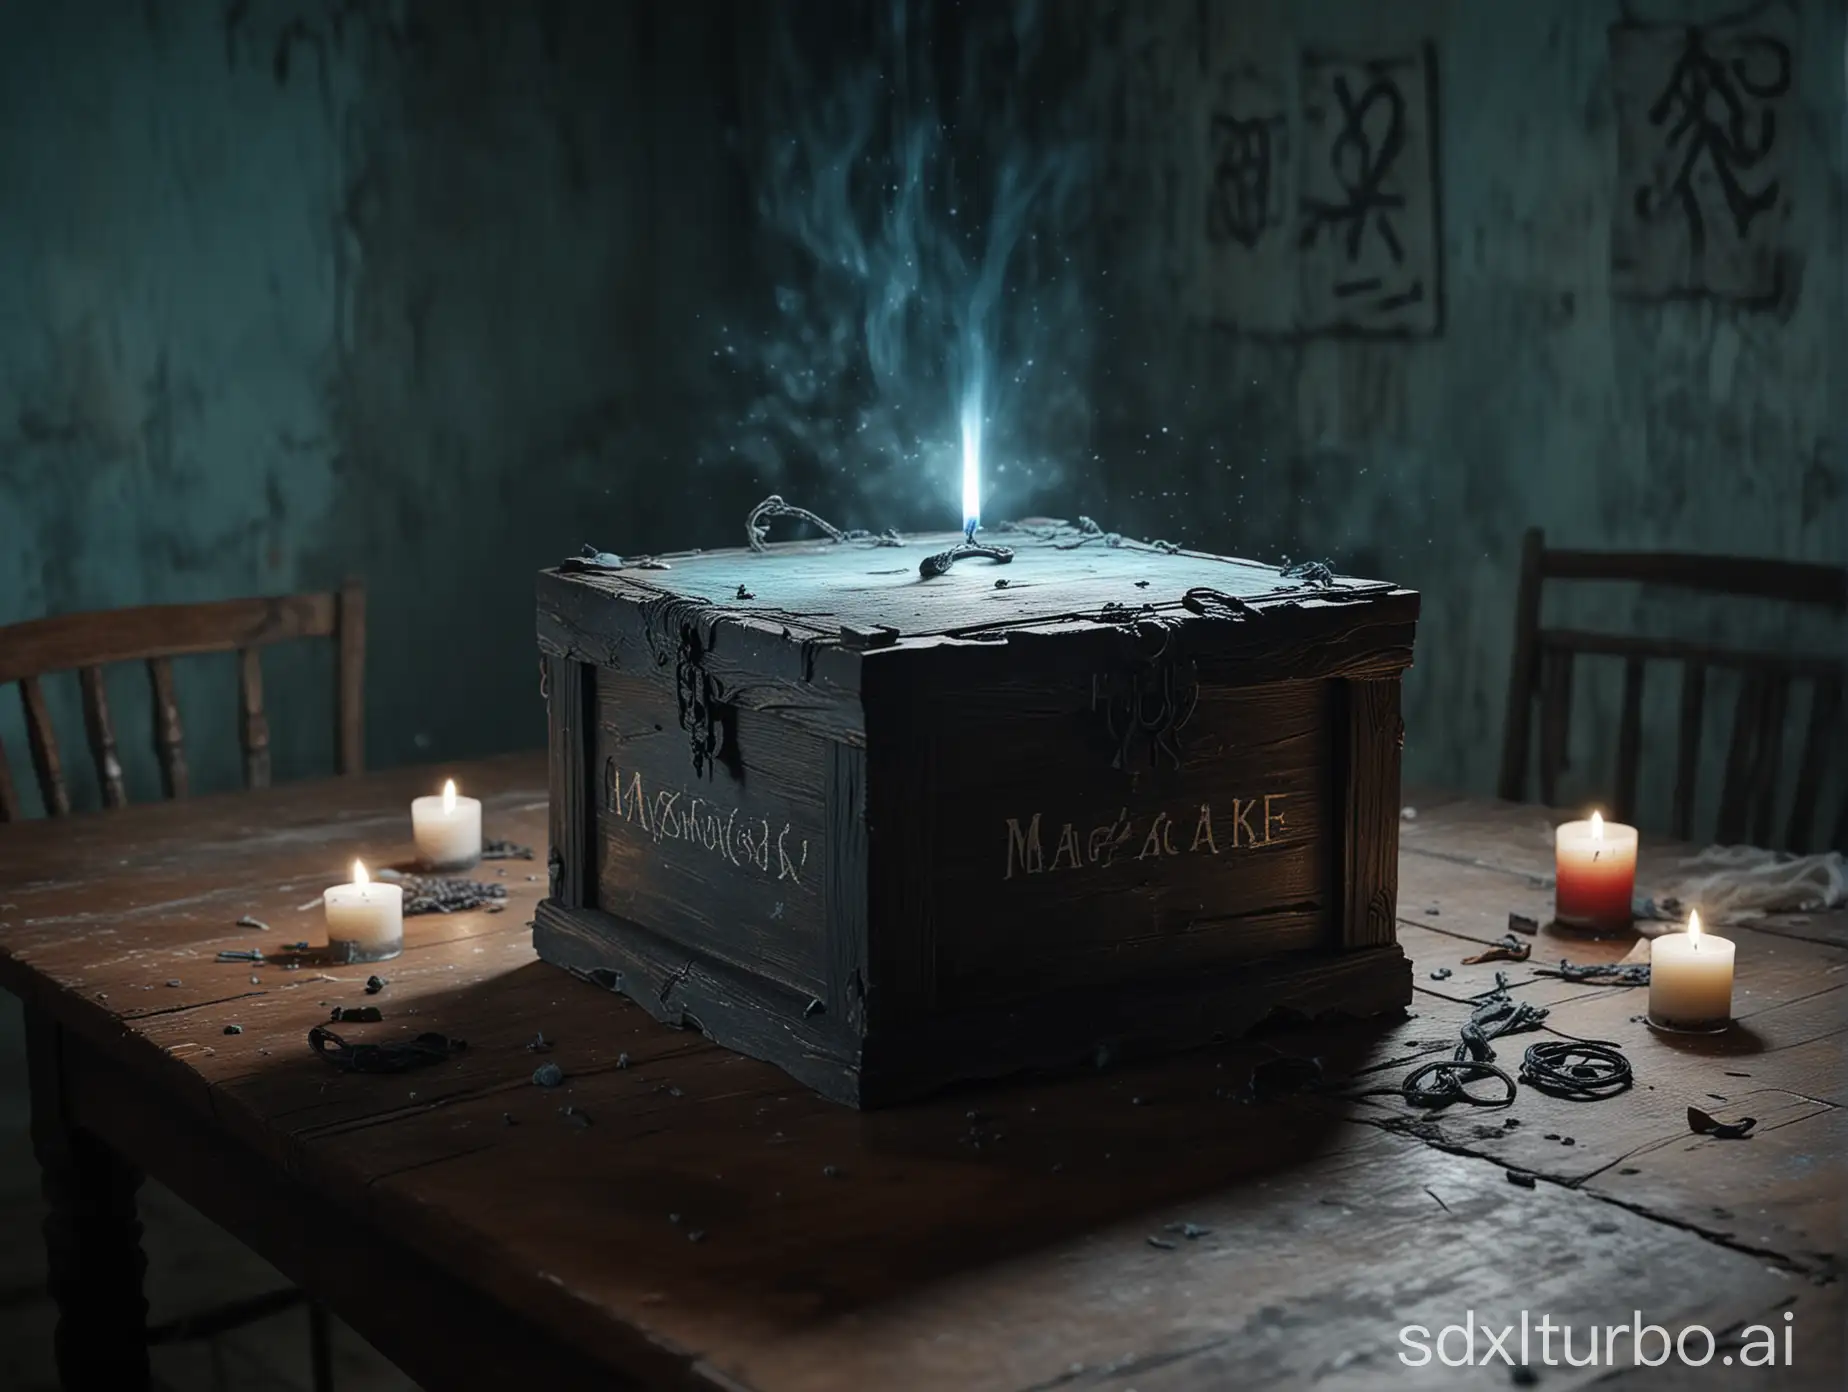 whole scene,sinophobia,In a dim and eerie chamber, the flaking walls are plastered with faded yellow talismans that cast eerie shadows under the flickering candlelight. At the heart of the room stands a rugged wooden table, draped with a red tablecloth mottled with bloodstains and grime, its coarse texture and frayed edges adding to the macabre. Hovering above the table is an ancient wooden box, its surface inscribed with twisted runes of enchantment, surrounded by an ominous aura of pale blue light, radiating a sense of impending doom. The entire scene is charged with an evil force on the brink of eruption, foretelling an unknown catastrophe.